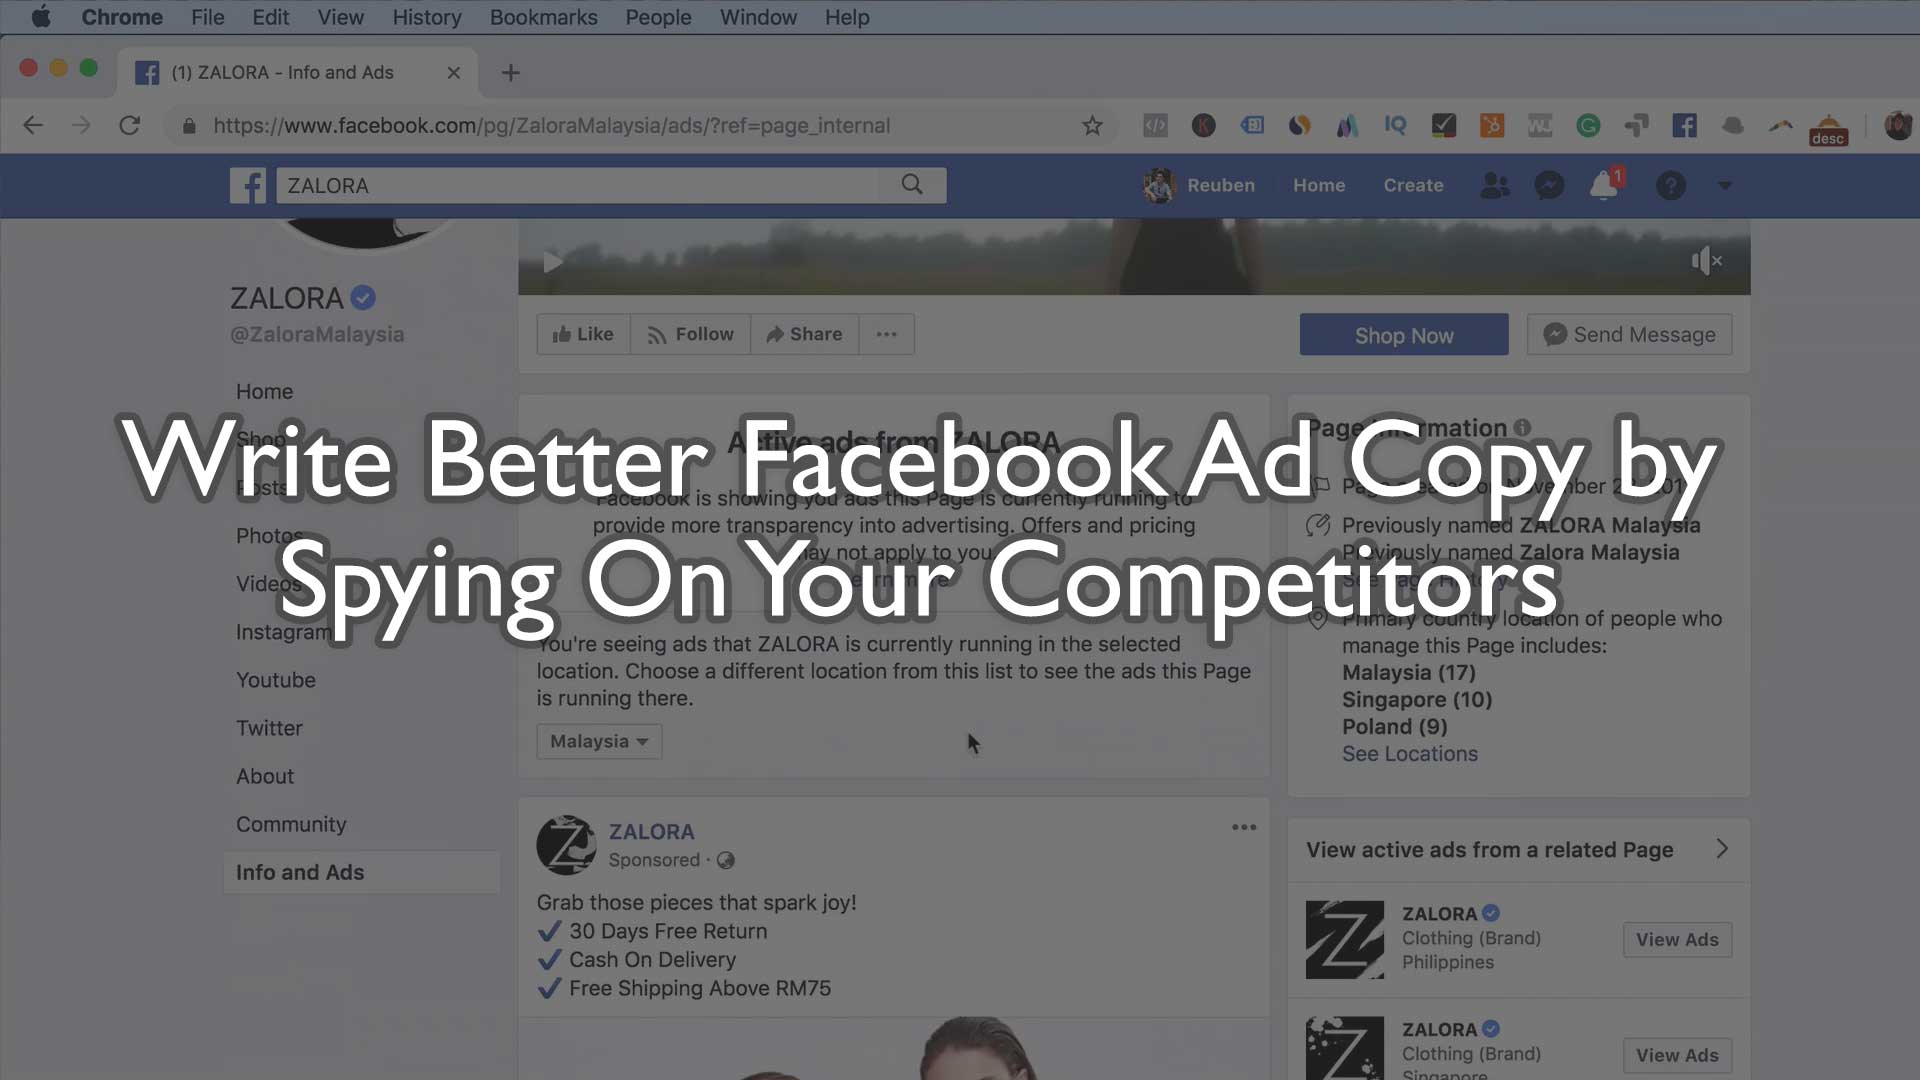 Write Better Facebook Ad Copy by Spying On Your Competitors